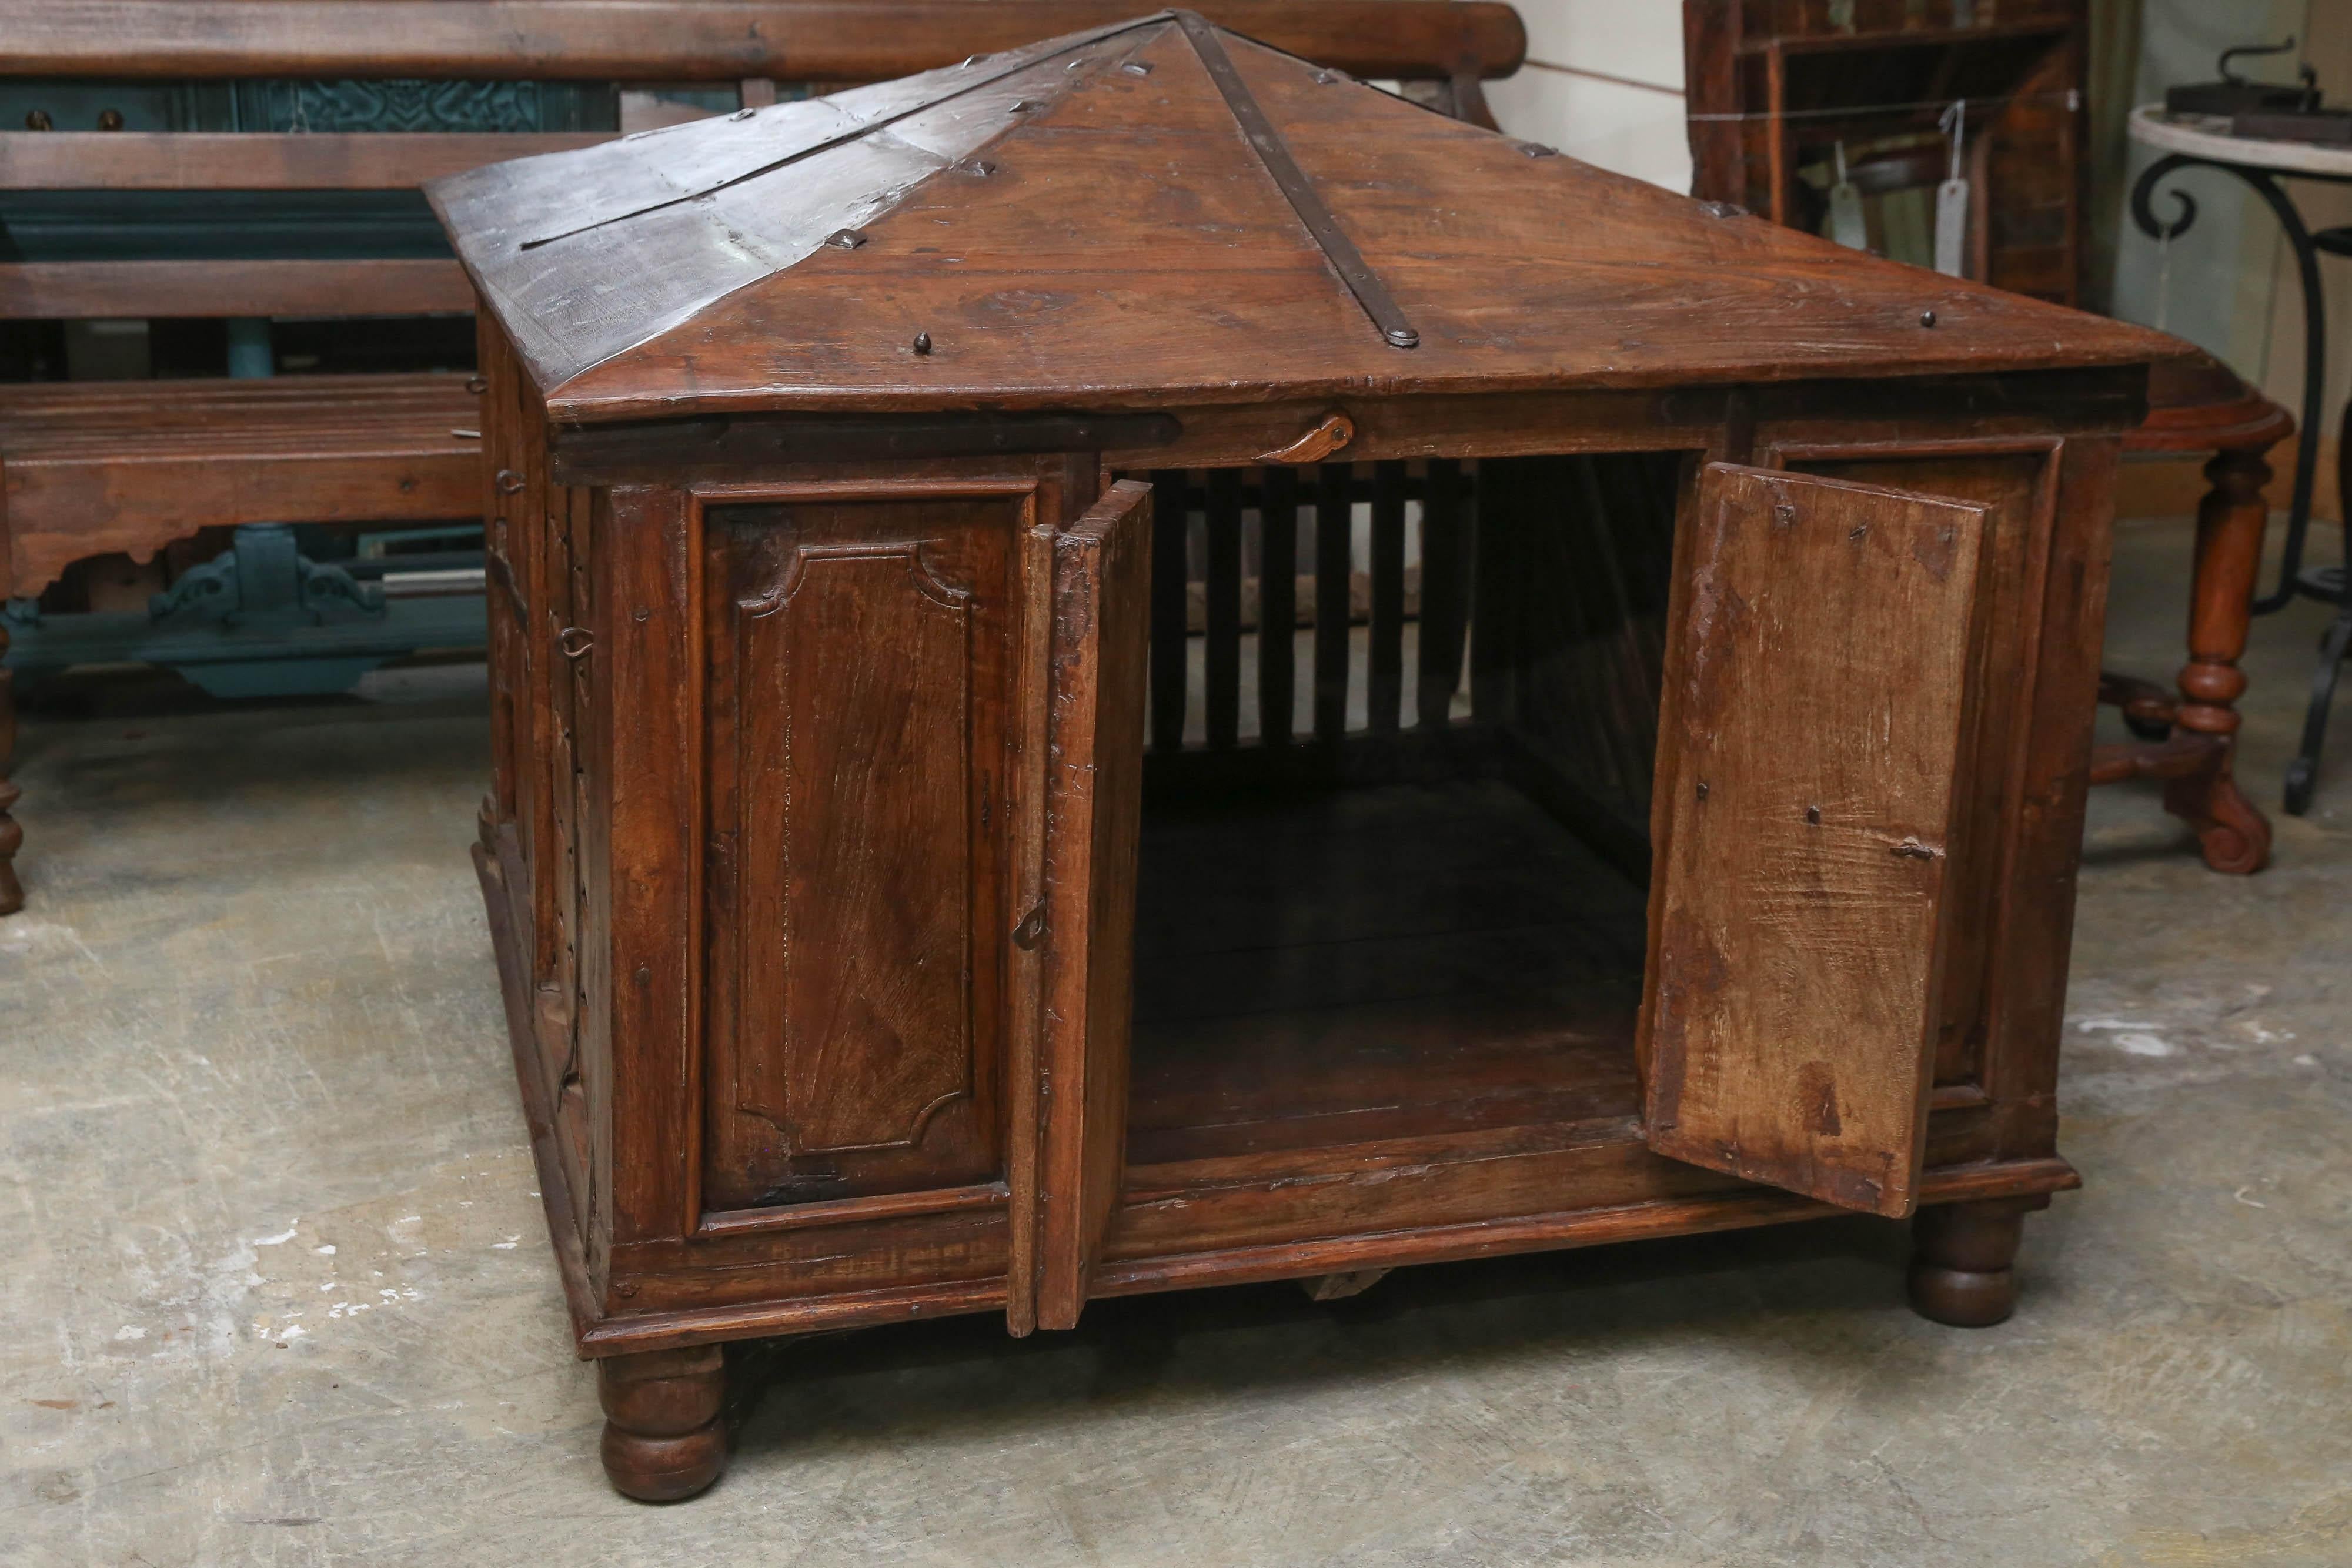 Hand-Crafted Grand 1890s Reinforced Solid Teak Wood Dog House from a Settler's Home For Sale